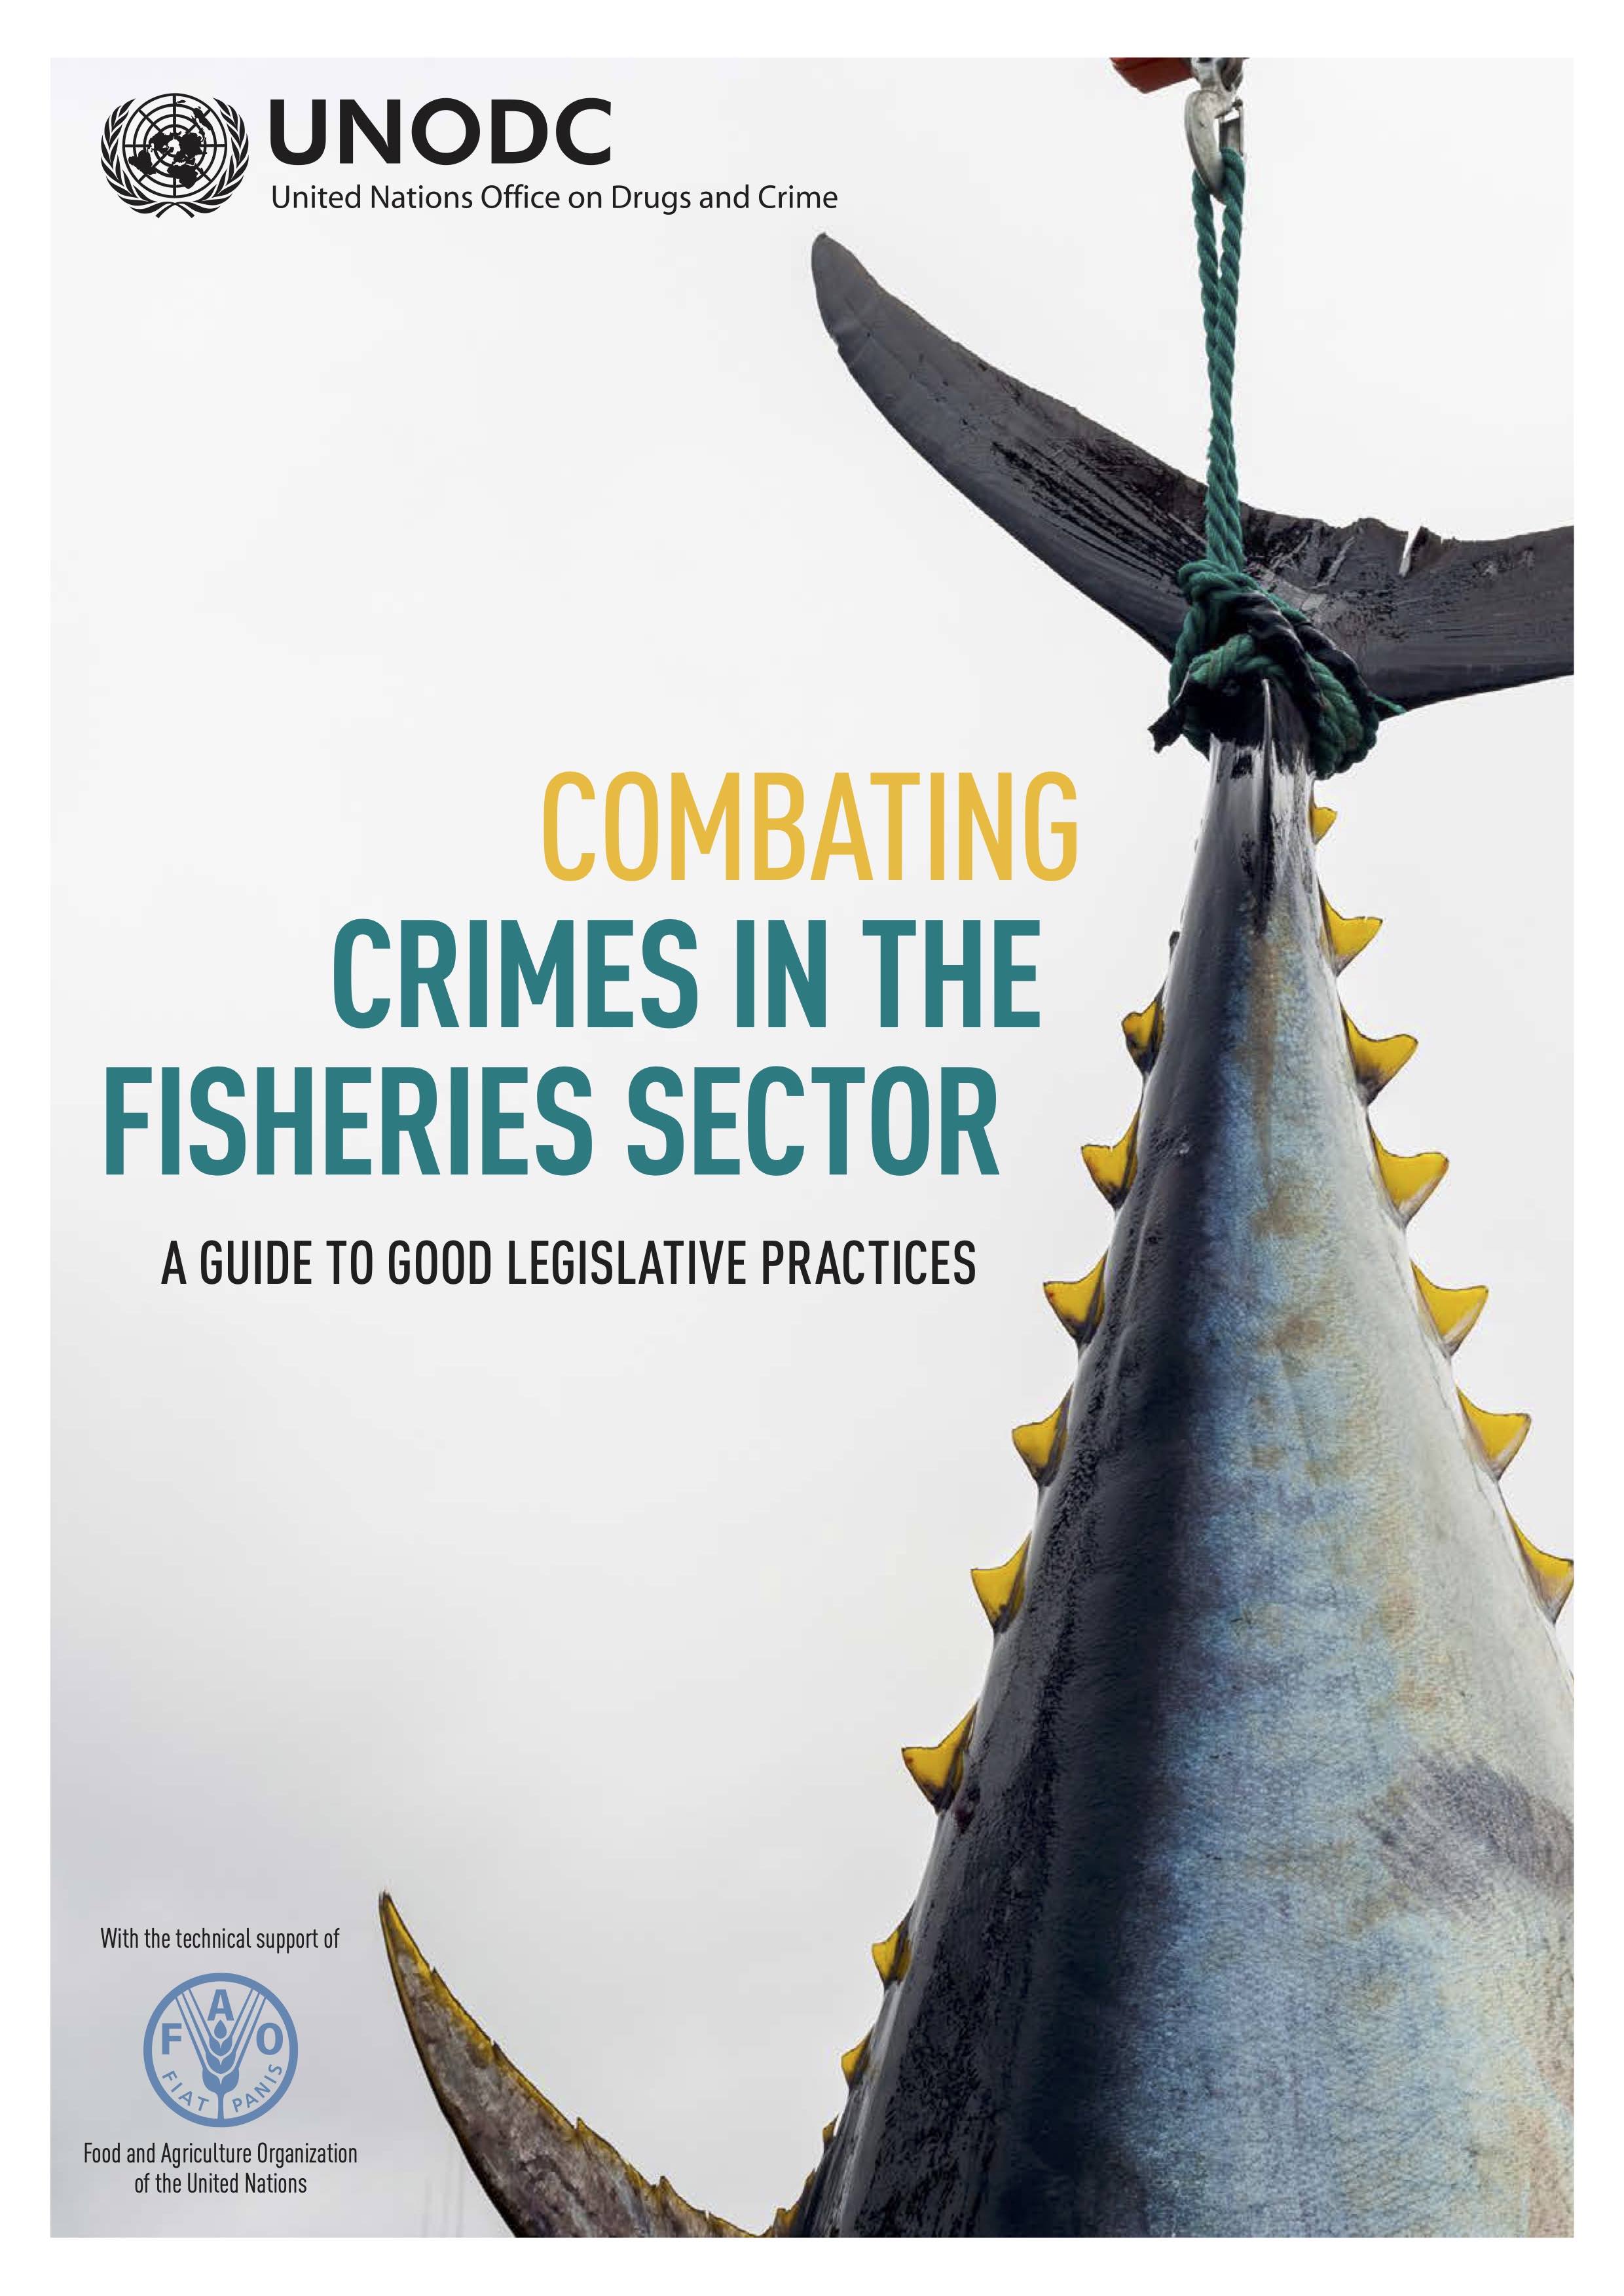 Cover page of the publication "Combating Crimes in the Fisheries Sector"